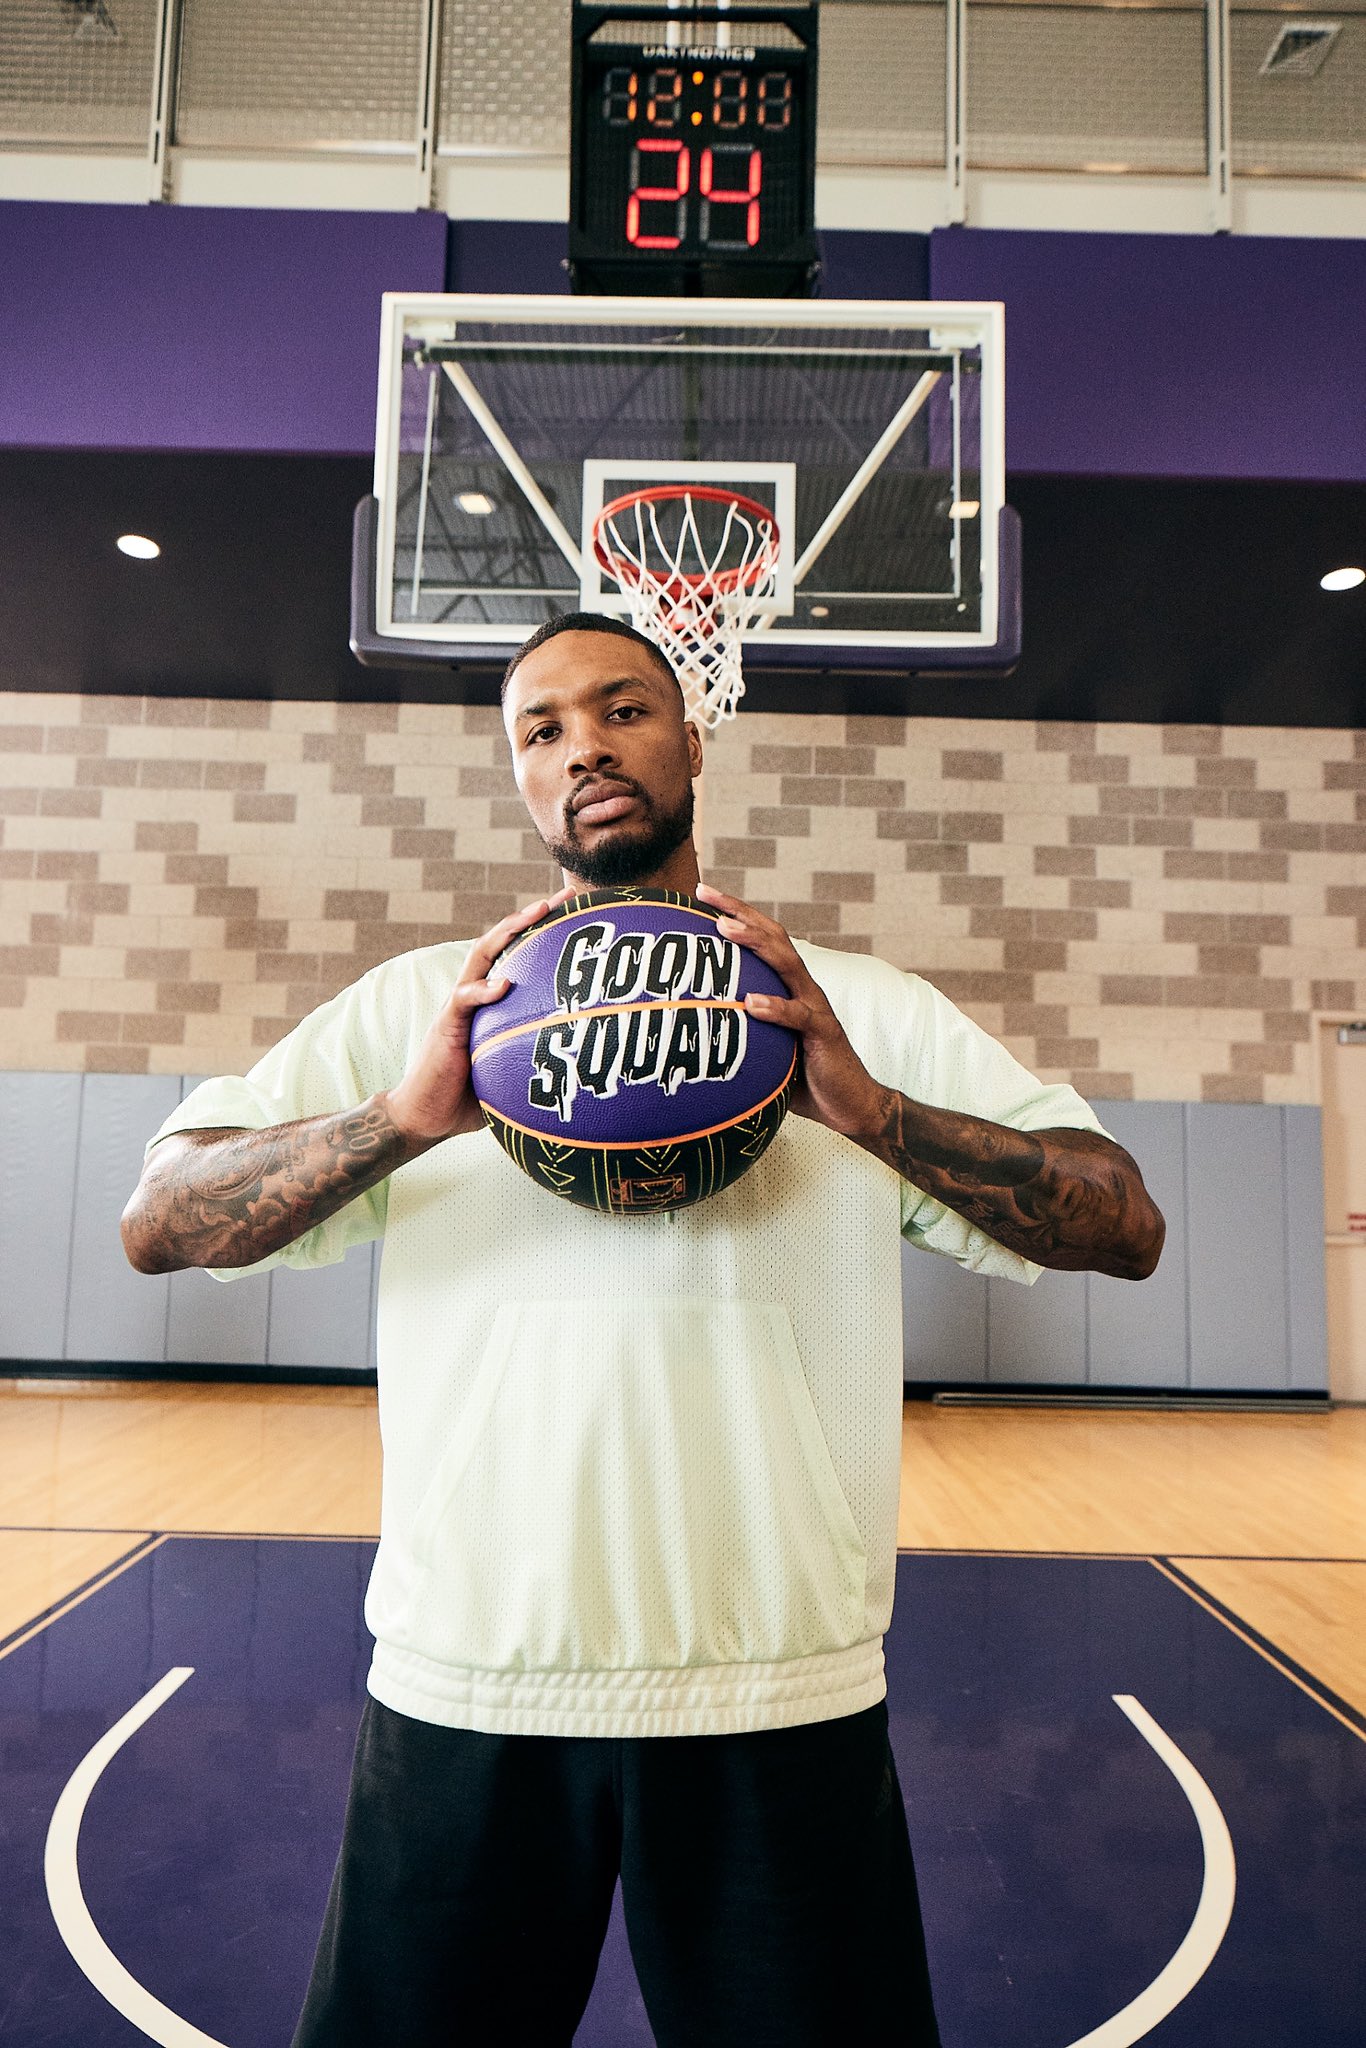 Damian Lillard on X: "⌚️It's About That Time. #SpaceJamMovie drops next  Friday, but you can sign up to get your Spalding x Space Jam Goon Squad  'Glow' 🏀 now. 🛒 https://t.co/Tapol0FnqZ https://t.co/z5d083g70W" /